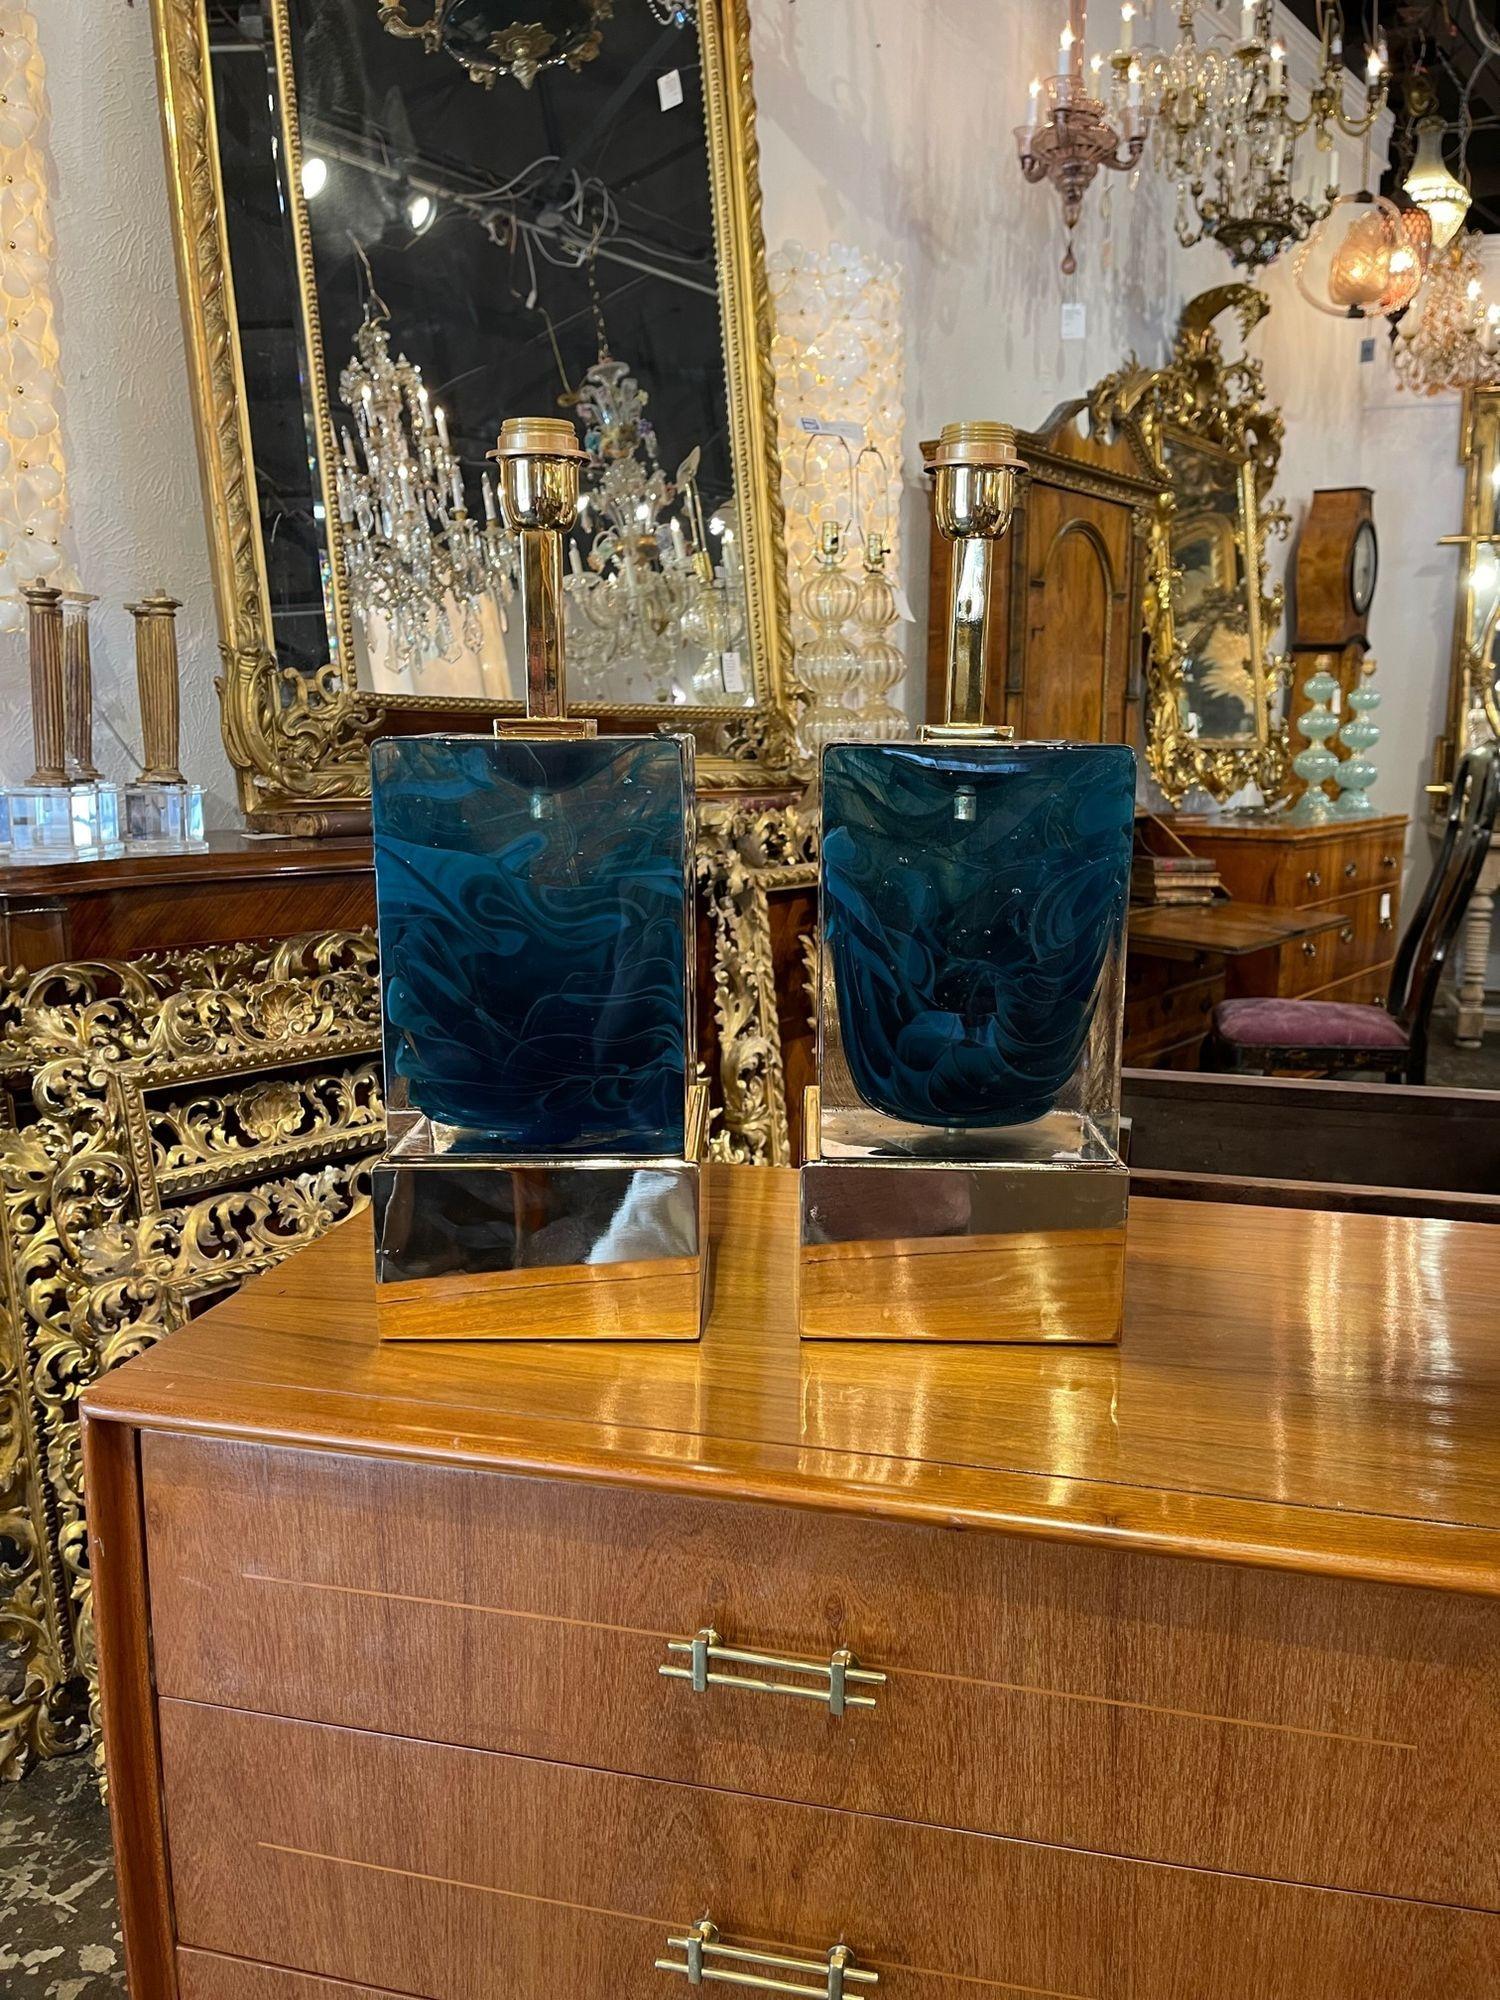 Gorgeous pair of modern blue Murano glass block lamps on a polished brass base. Featuring a vibrant color on the glass and a decorative brass base. These are exceptional!!